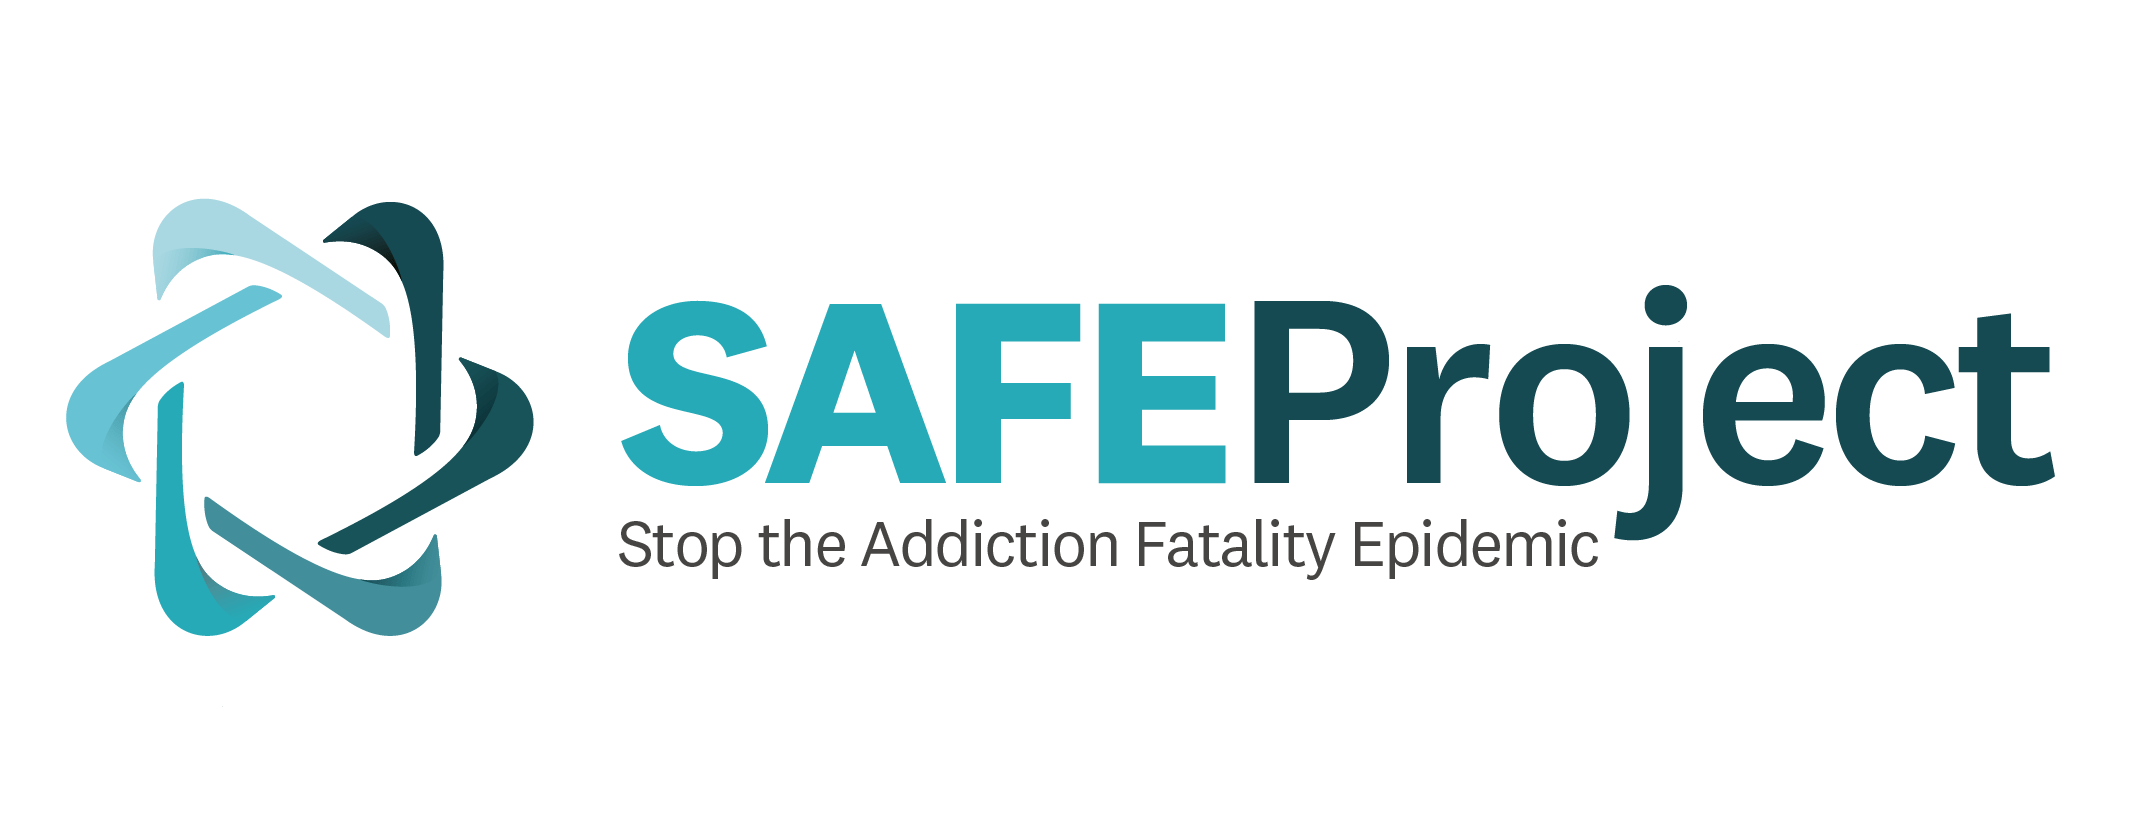 SAFEProject: Stop the Addiction Fatality Epidemic